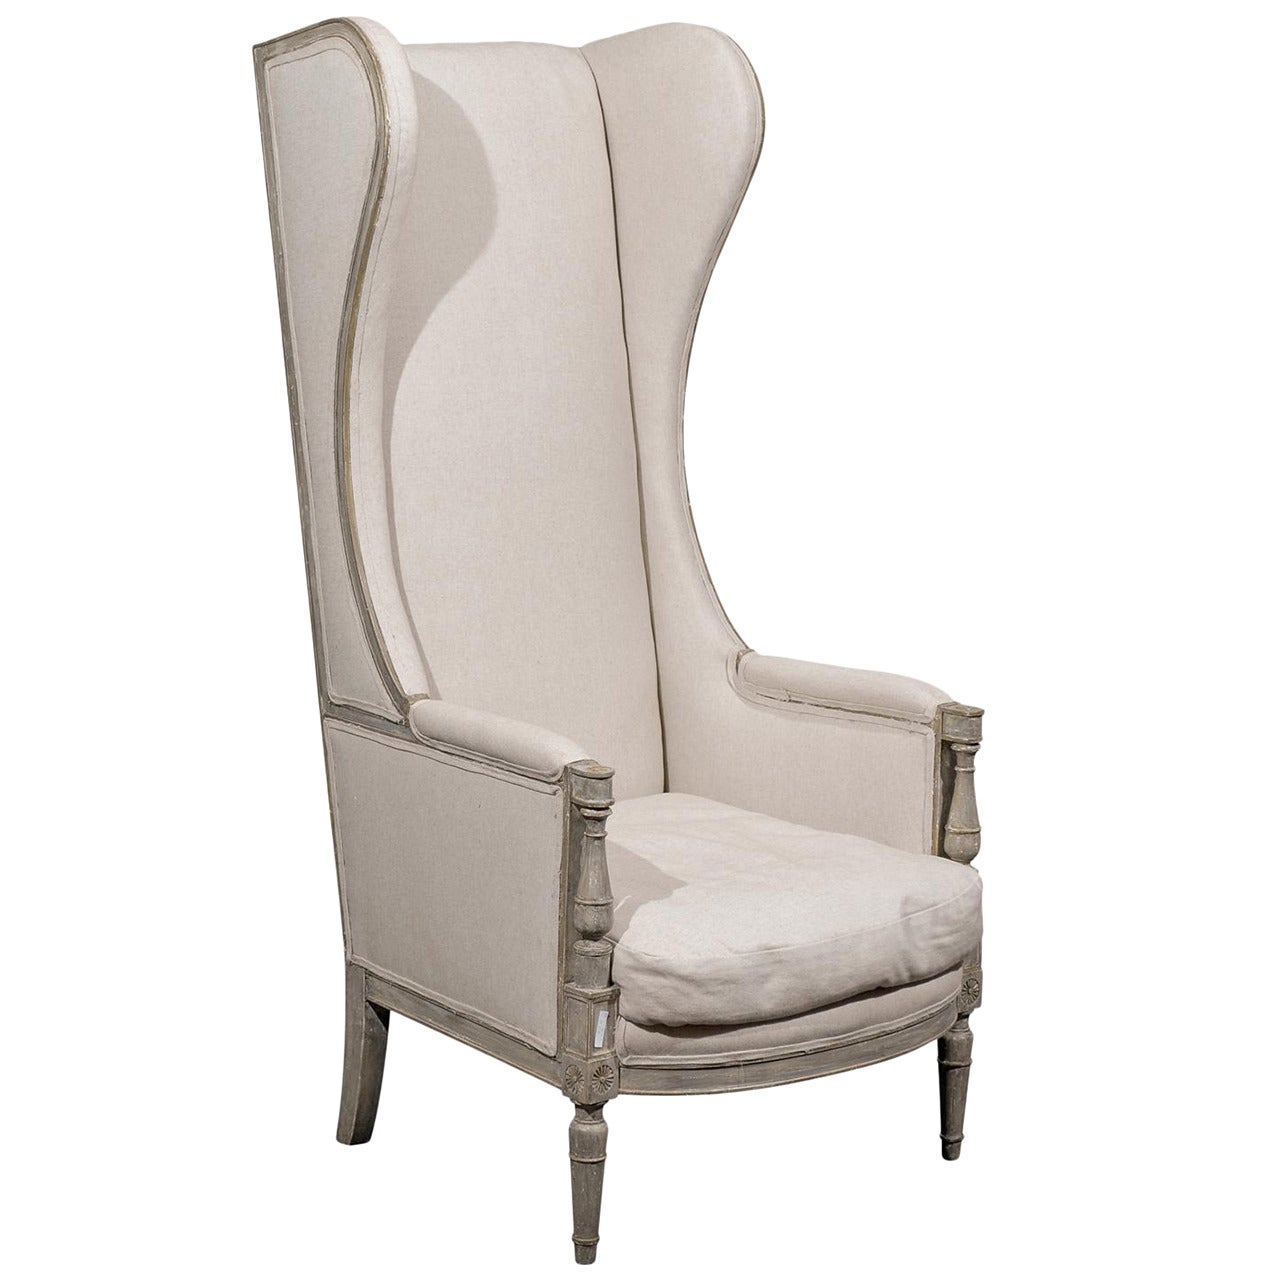 American Upholstered Painted Wood High Back Wing Chair